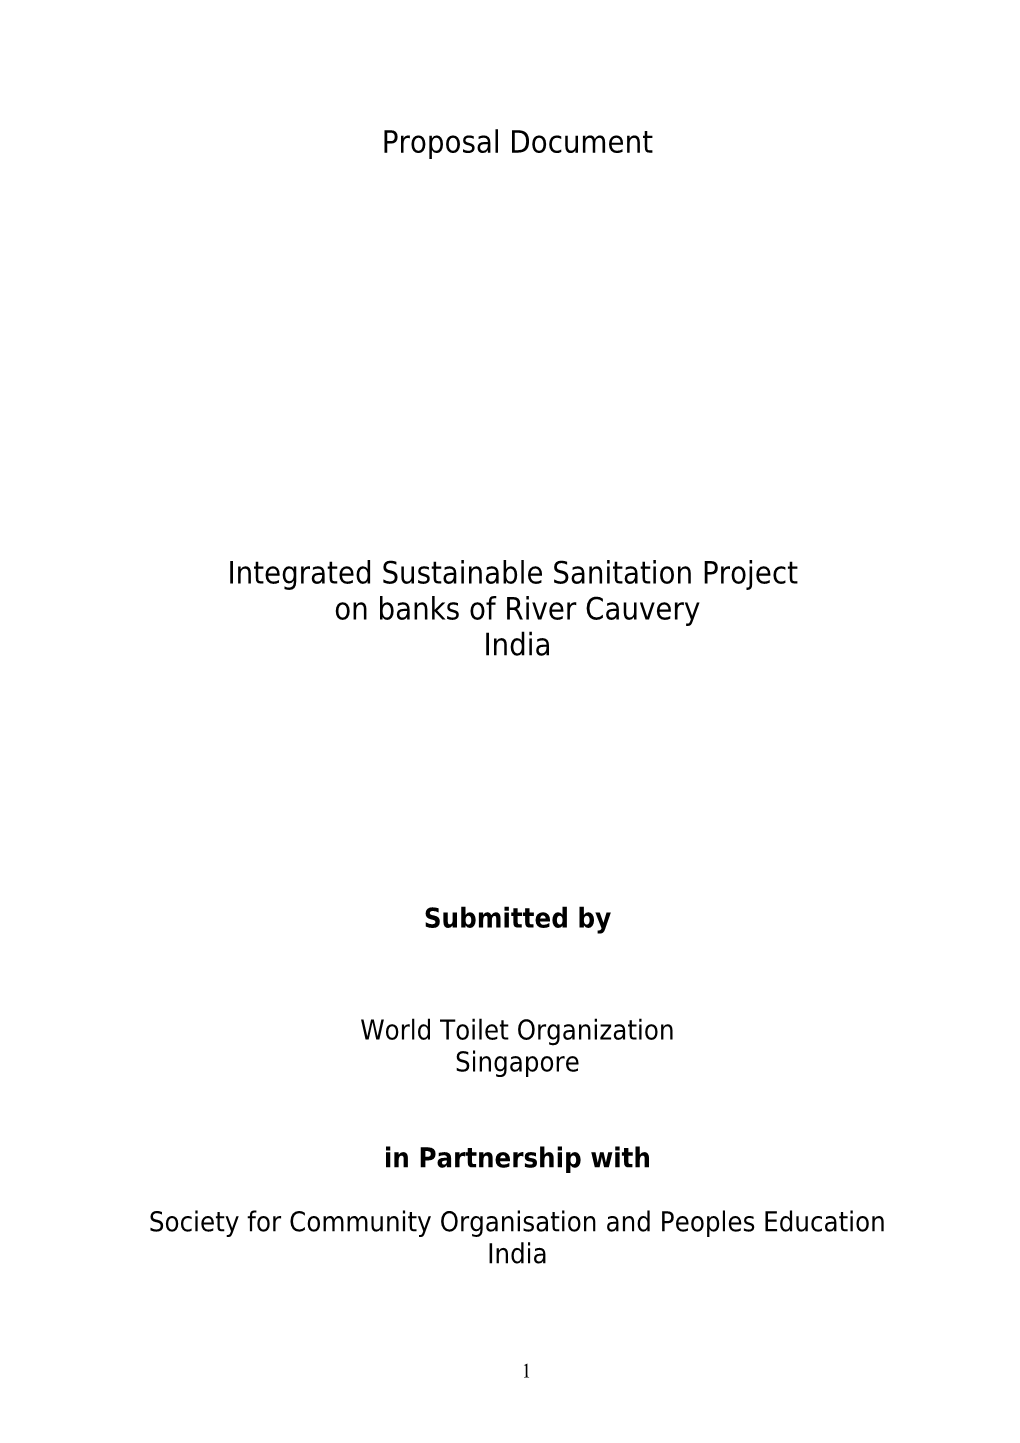 Integrated Sustainable Sanitation Project